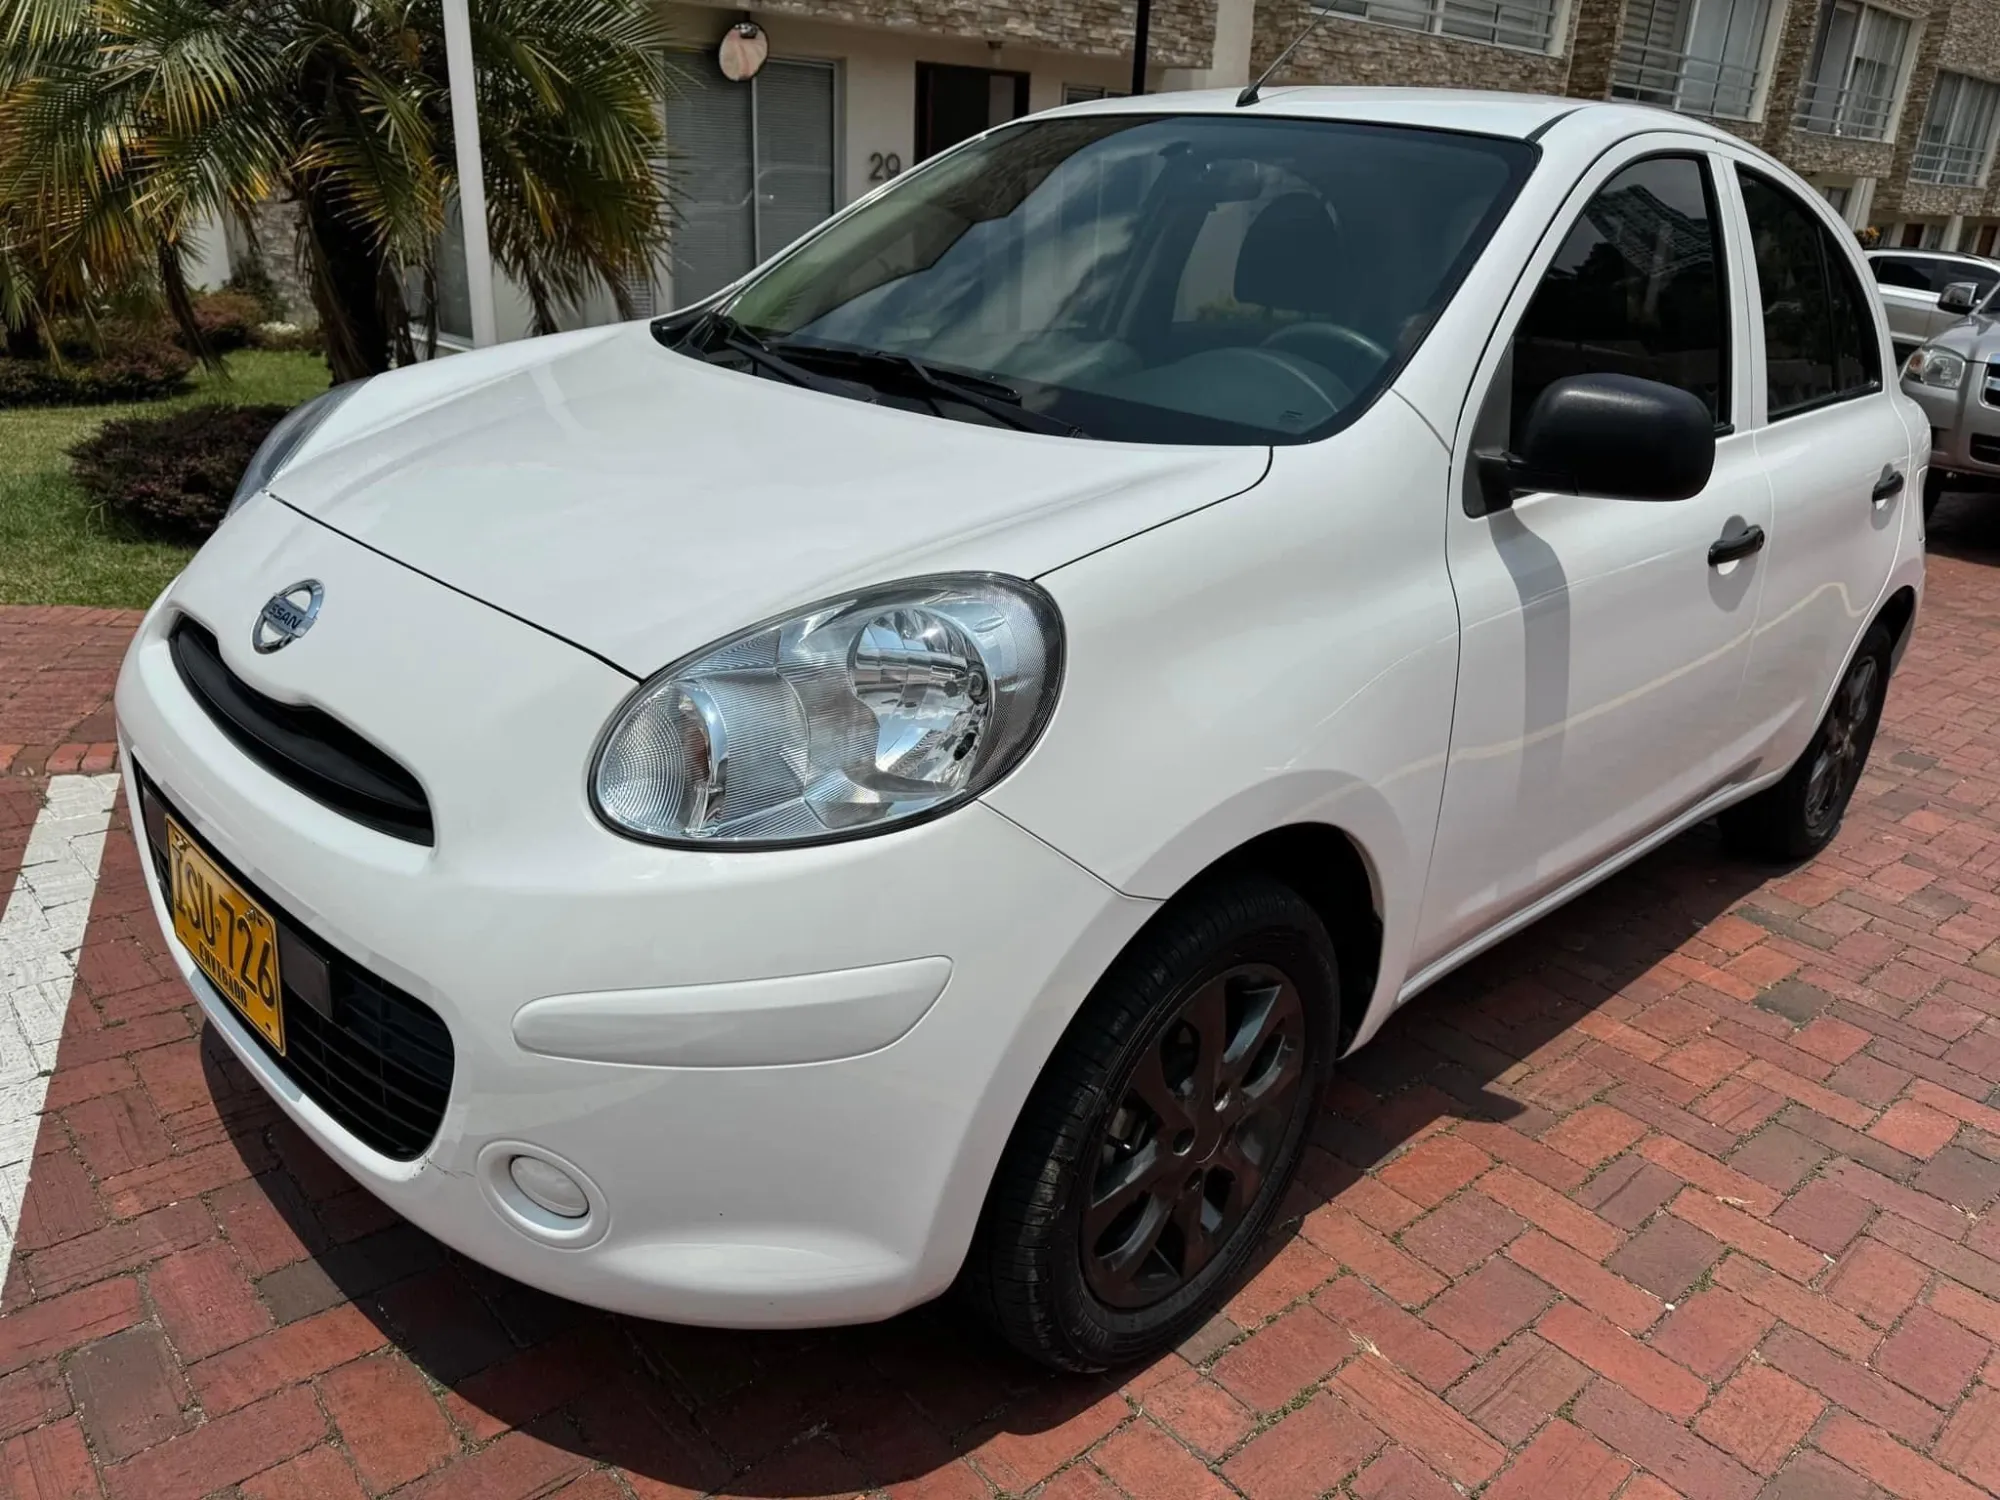 NISSAN MARCH ACTIVE